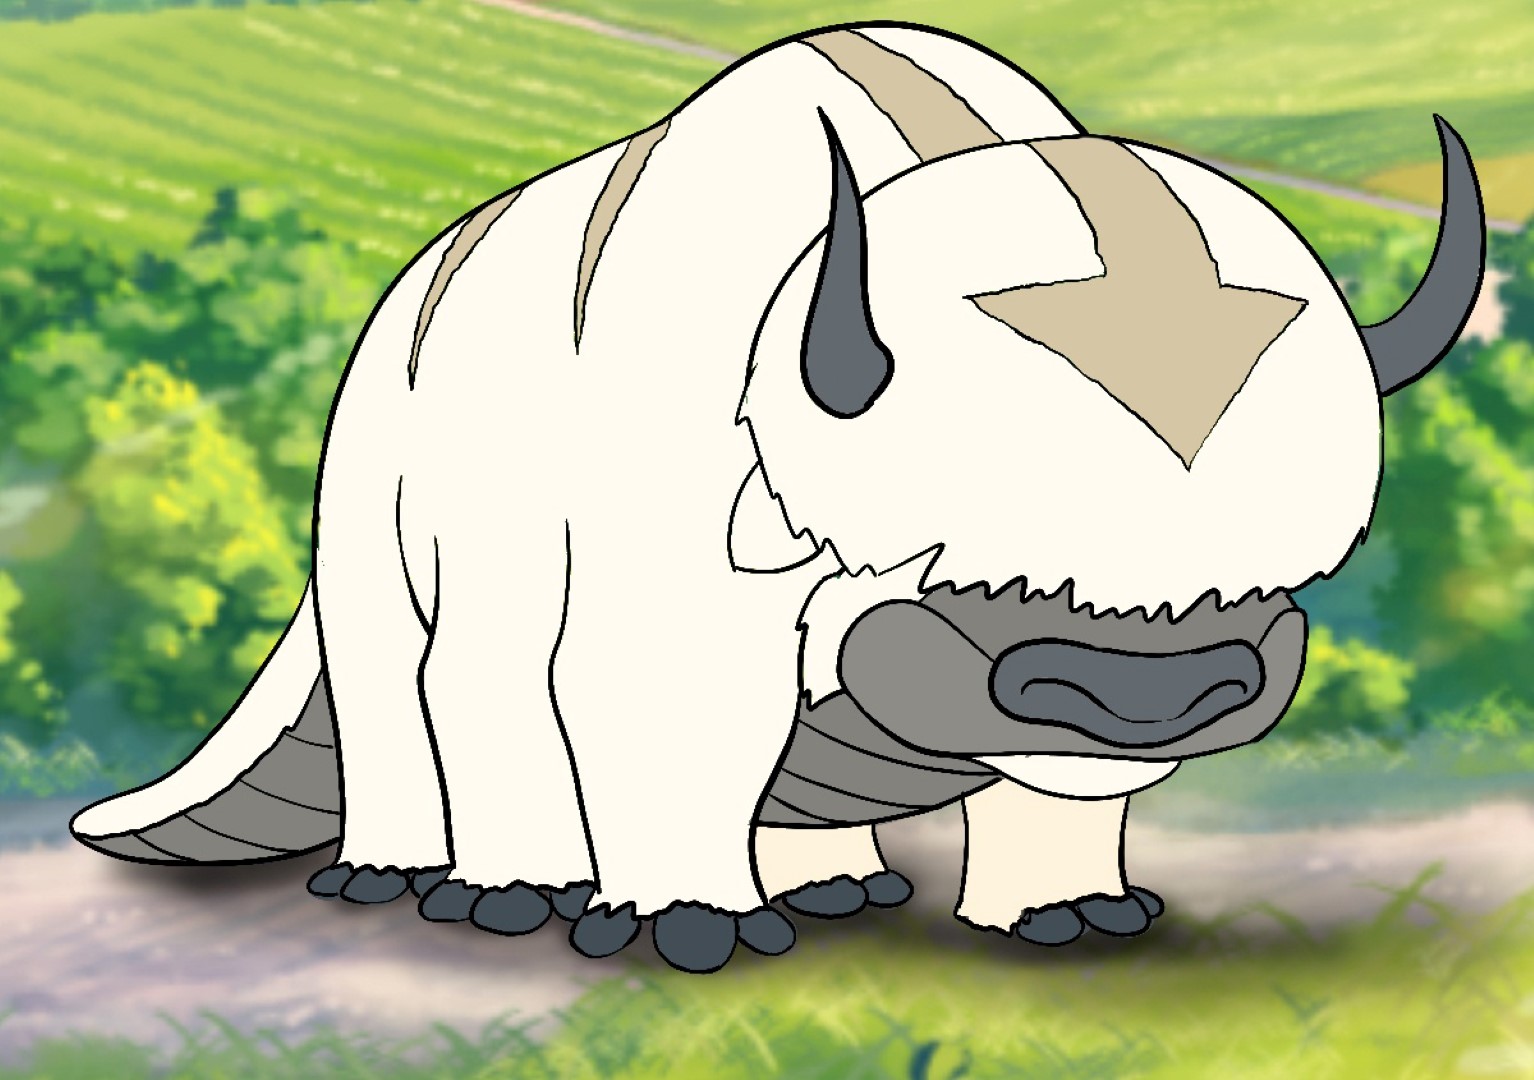 How To Draw Appa From Avatar The Last Airbender - Draw Central.